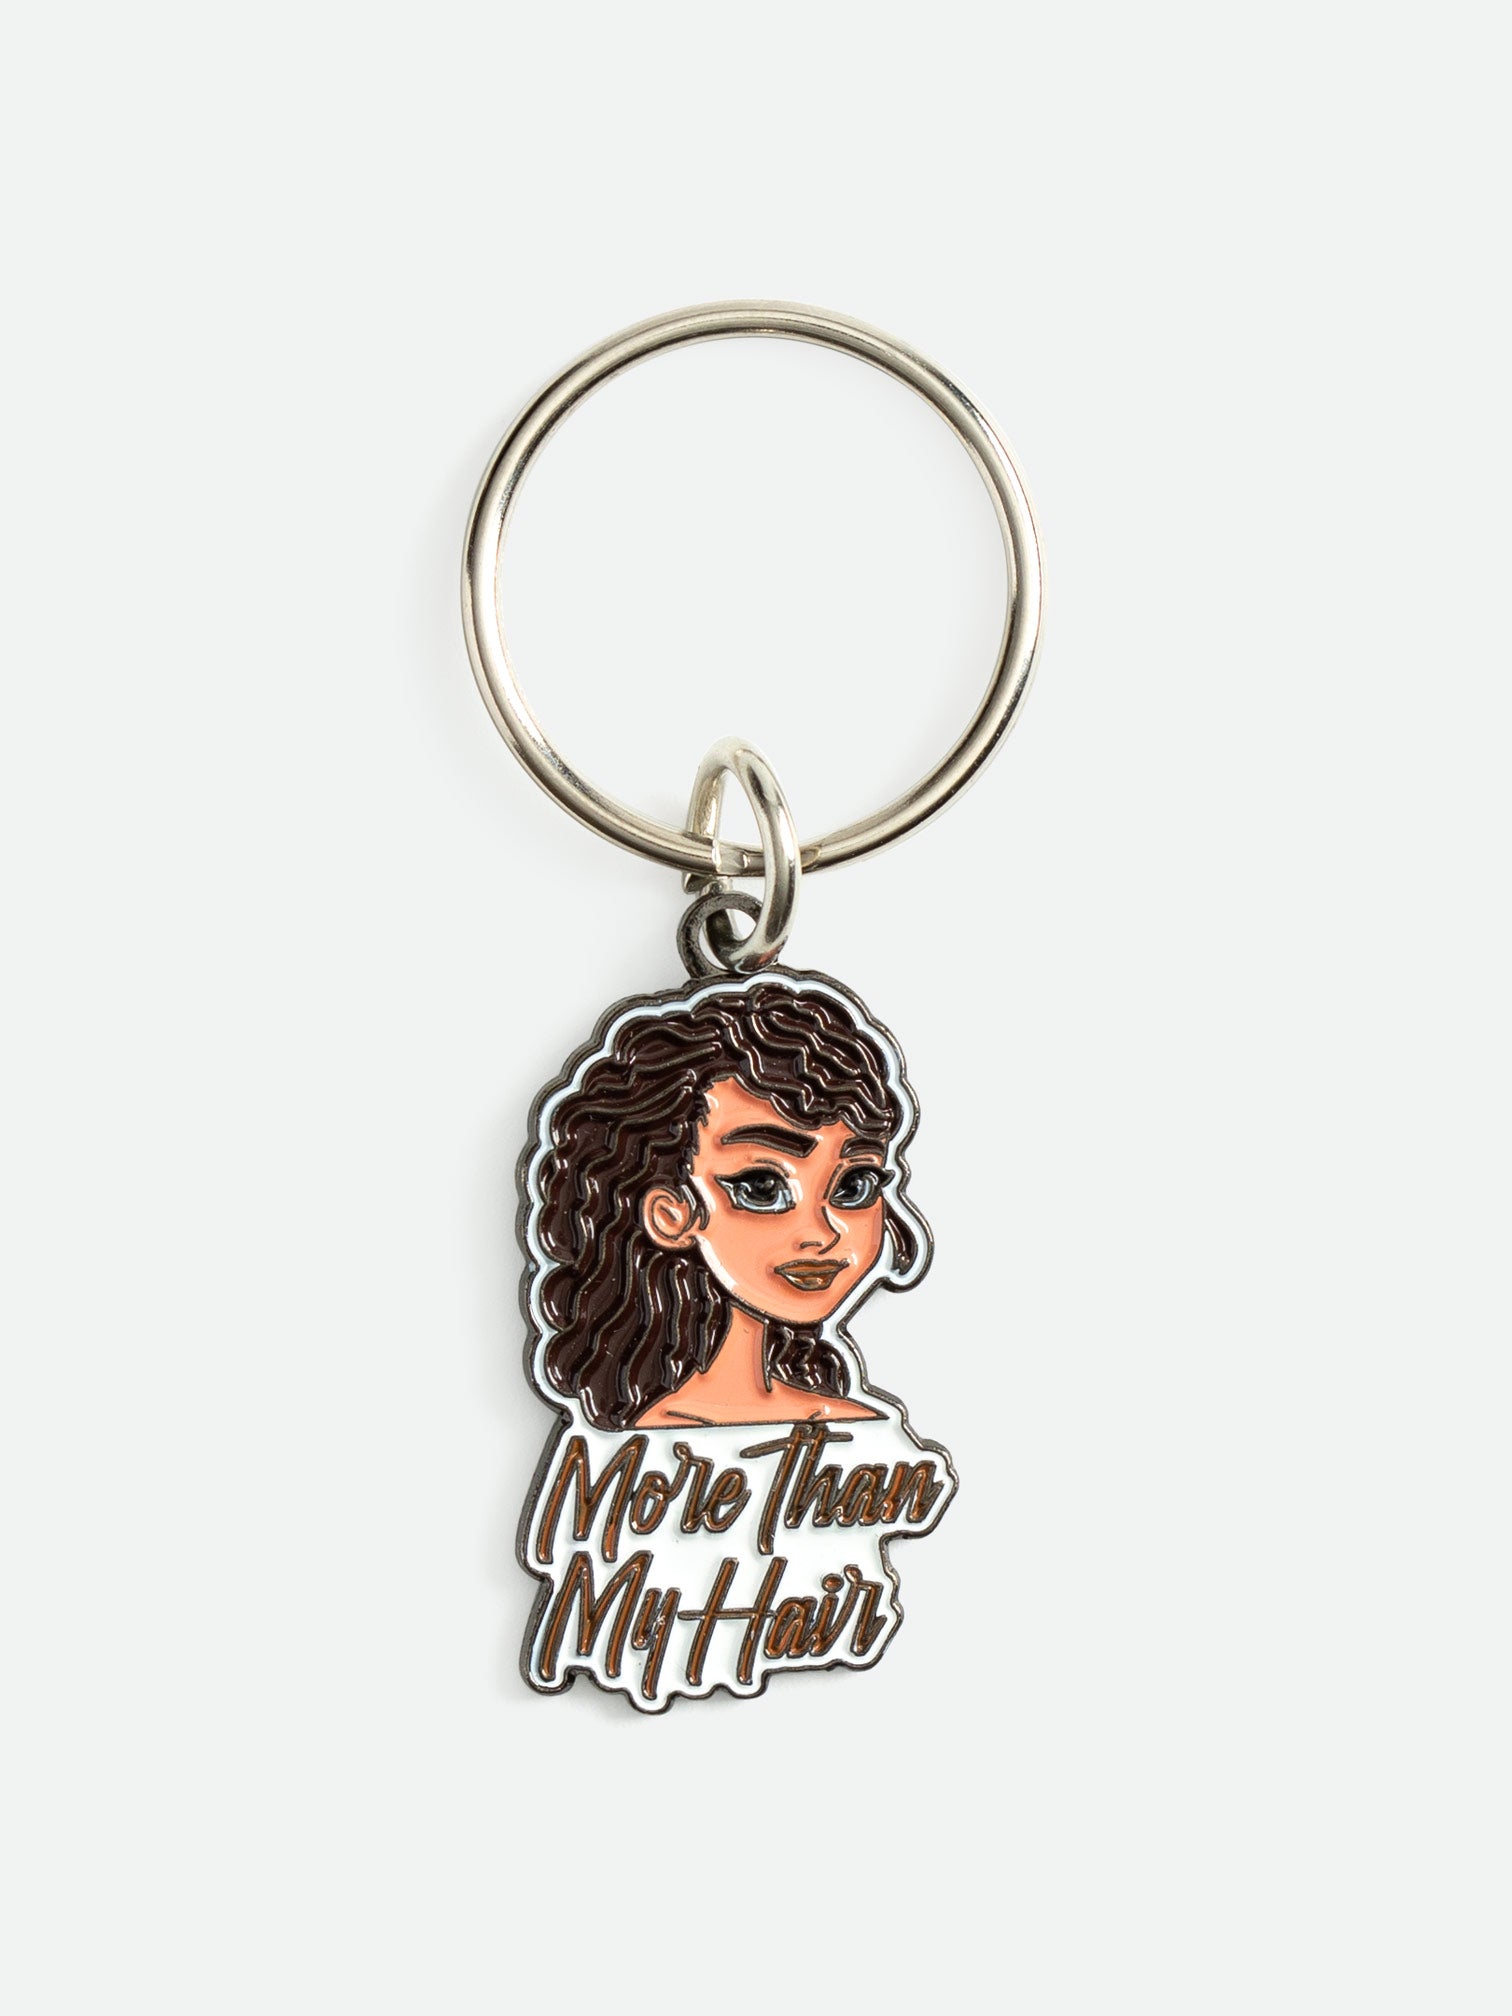 More Than My Hair Keychain - Mosaic the Label